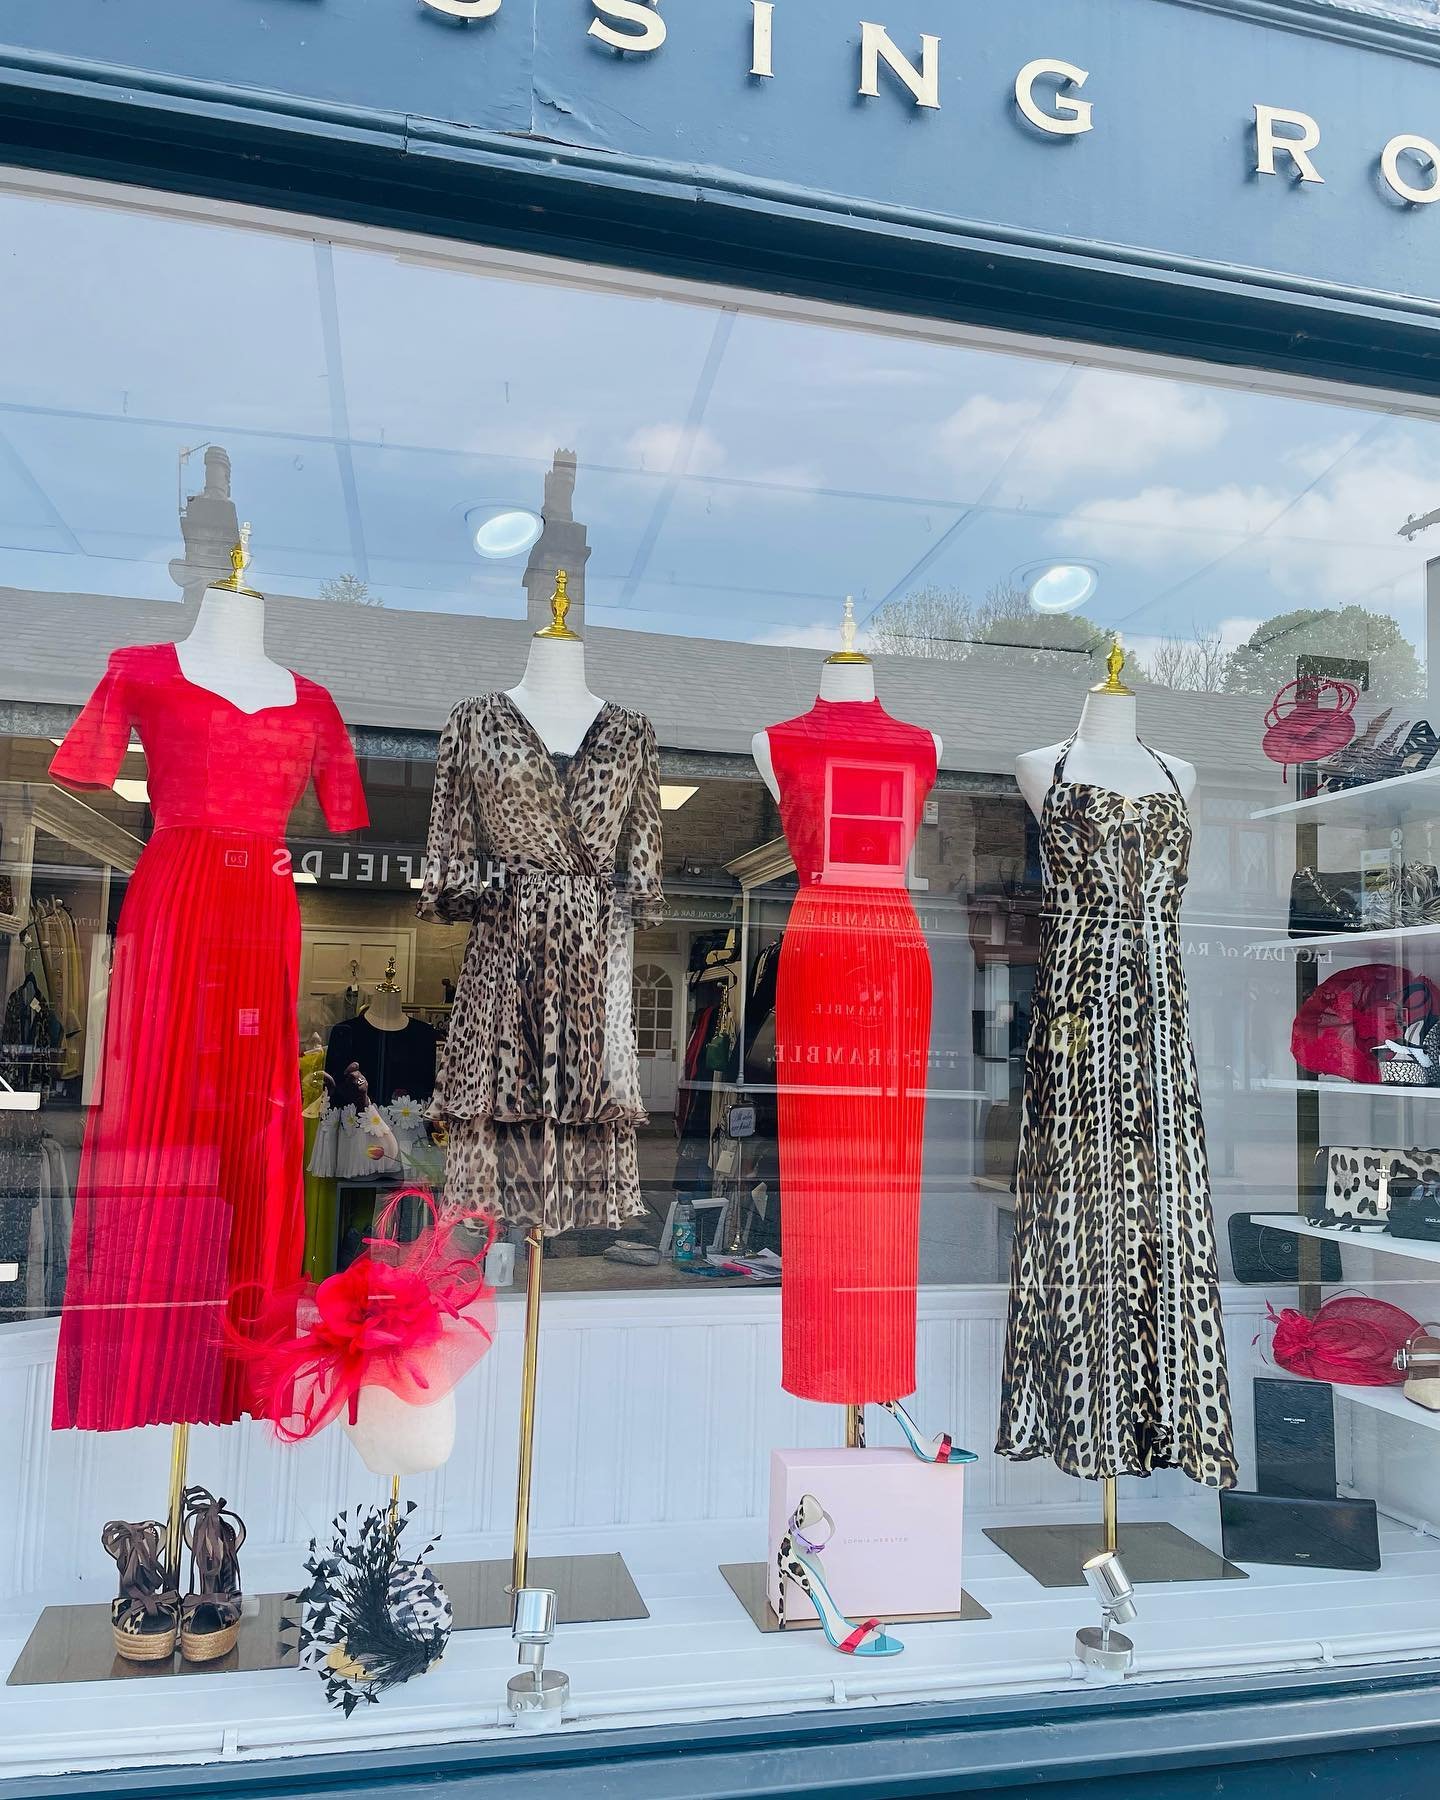 Be the BEST DRESSED! The date is in your diary, but what to wear? Our glamorous outfits will ensure you have just the right look for every event this Summer ☀️❤️🌞

L-R
Elie Tahari red dress size 8/10 &pound;250
Christian Louboutin wedges size 6 &pou